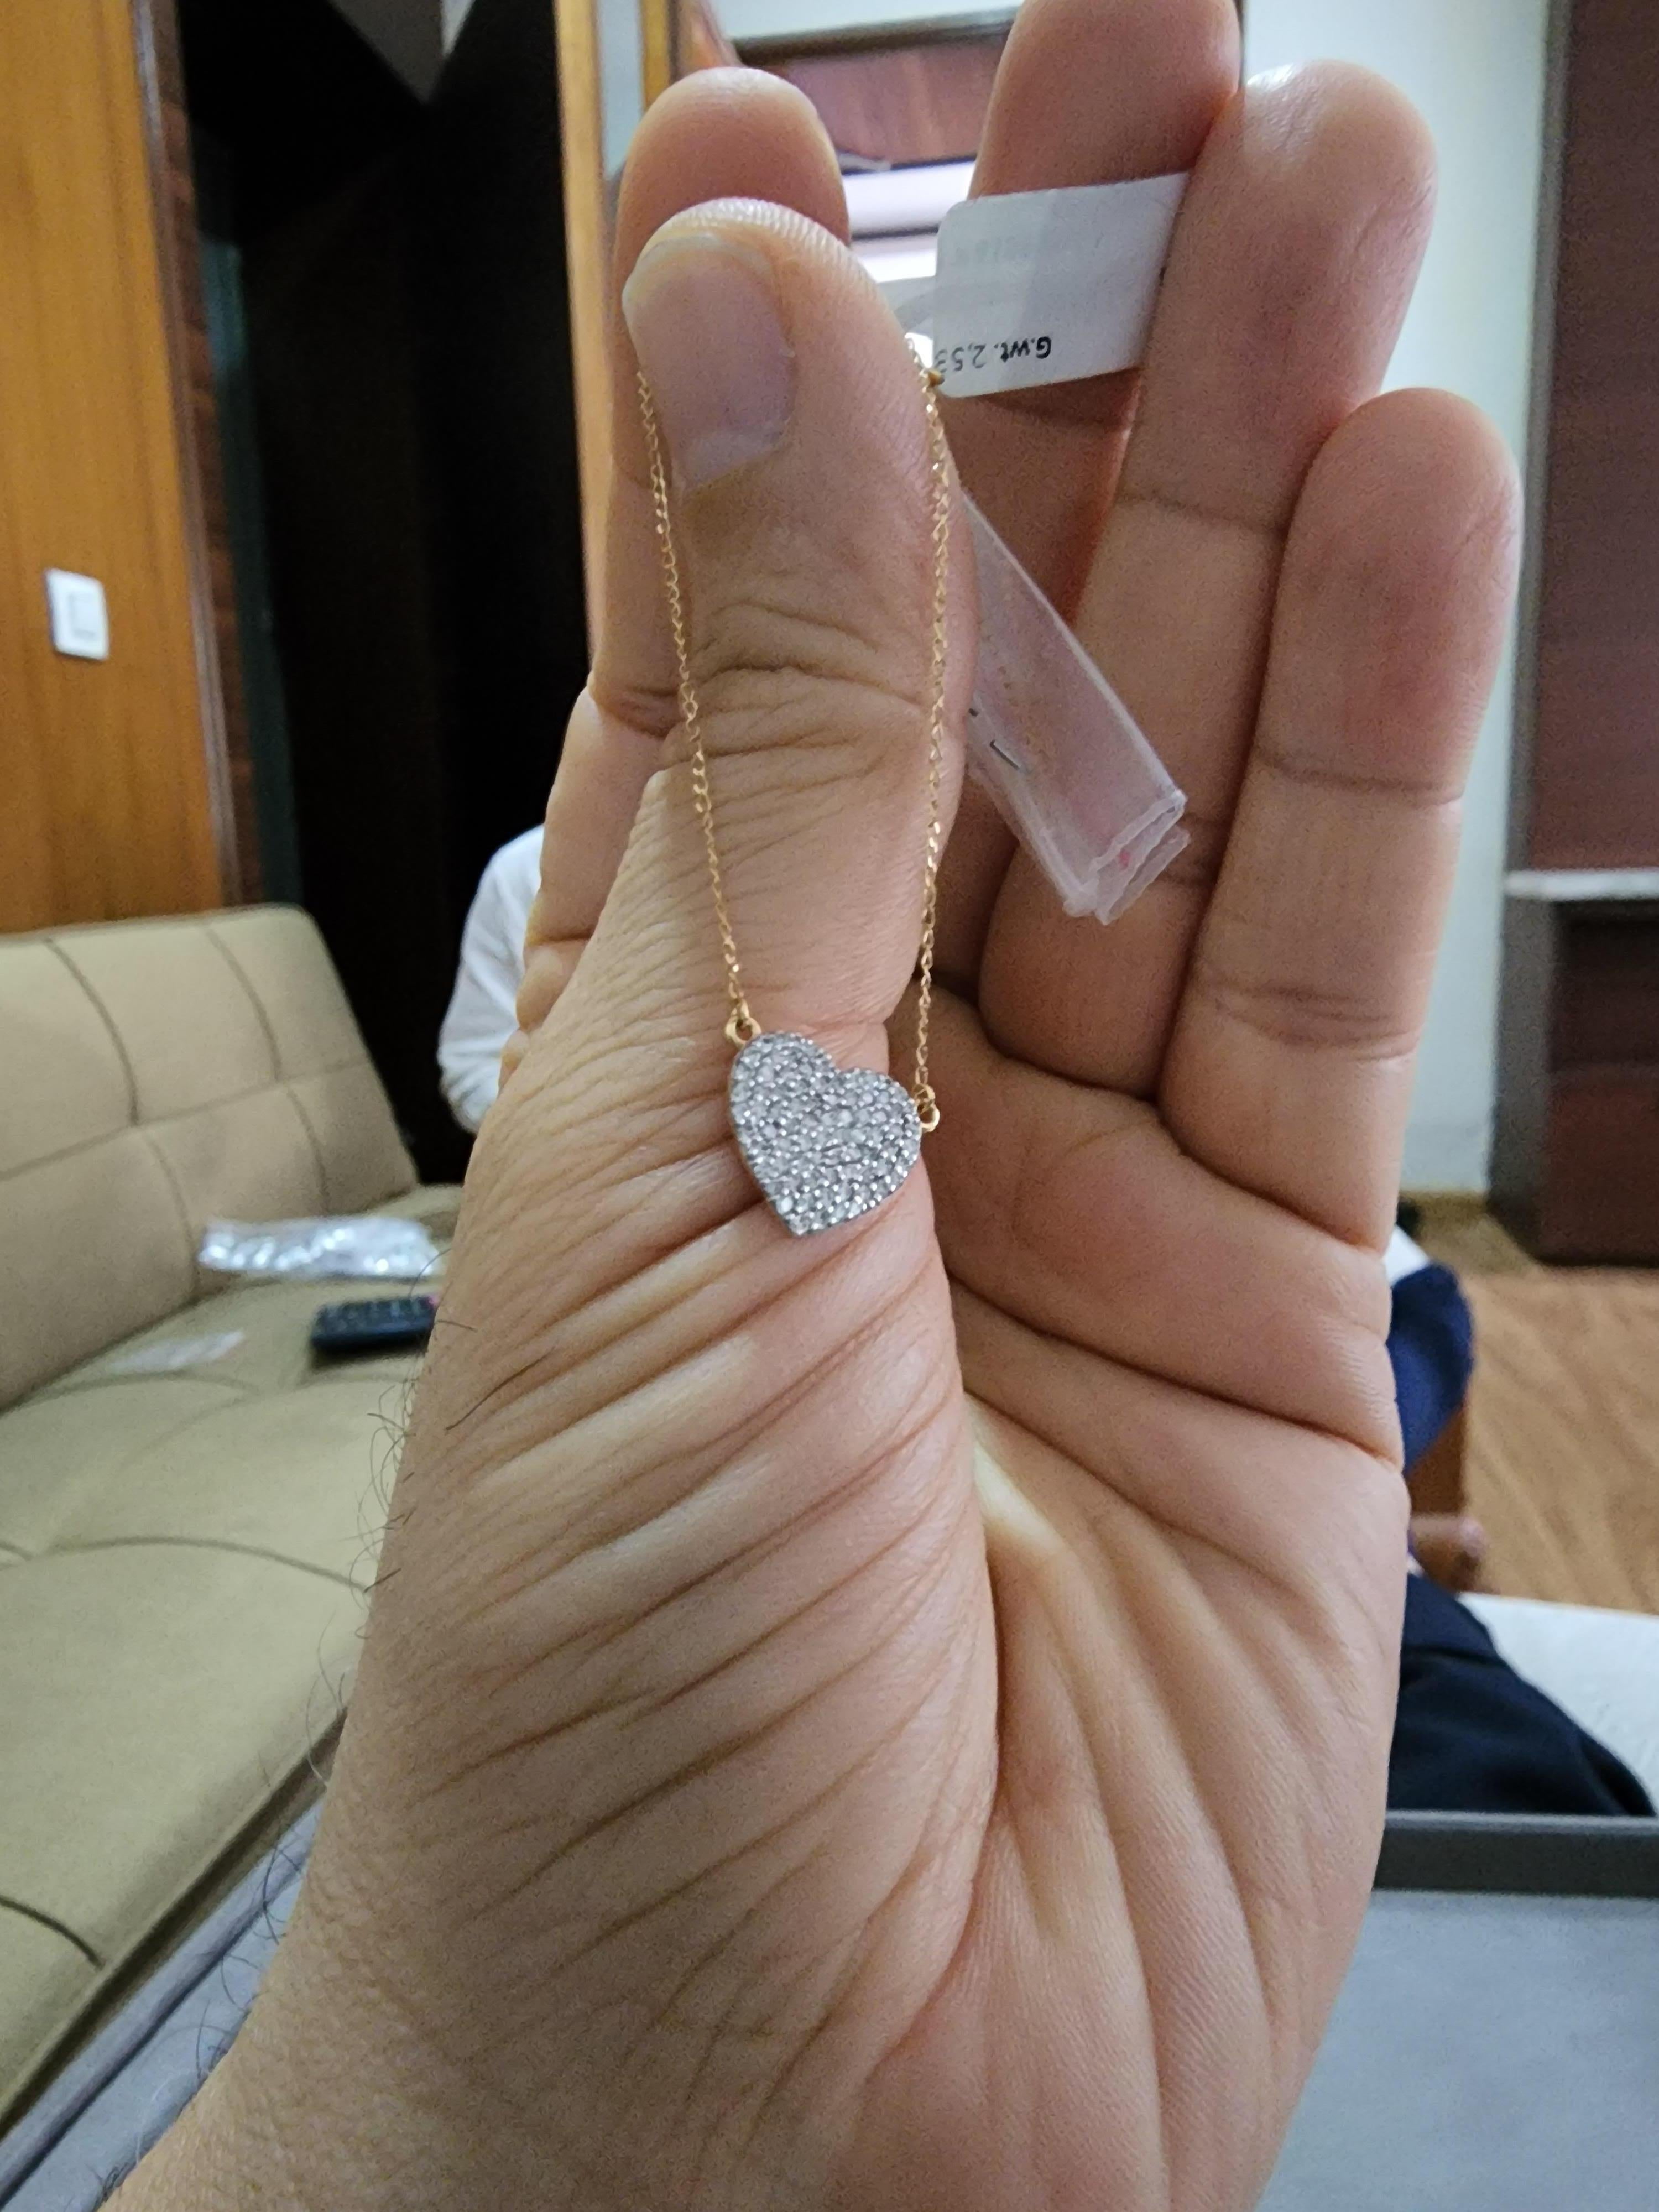 This is an amazing natural diamond pendant with 0.56 carats of white diamonds. Gold Weight is 2.42 gms (18k). Comes with a gold chain

It’s very hard to capture the true color and luster of the stone, I have tried to add pictures which are taken